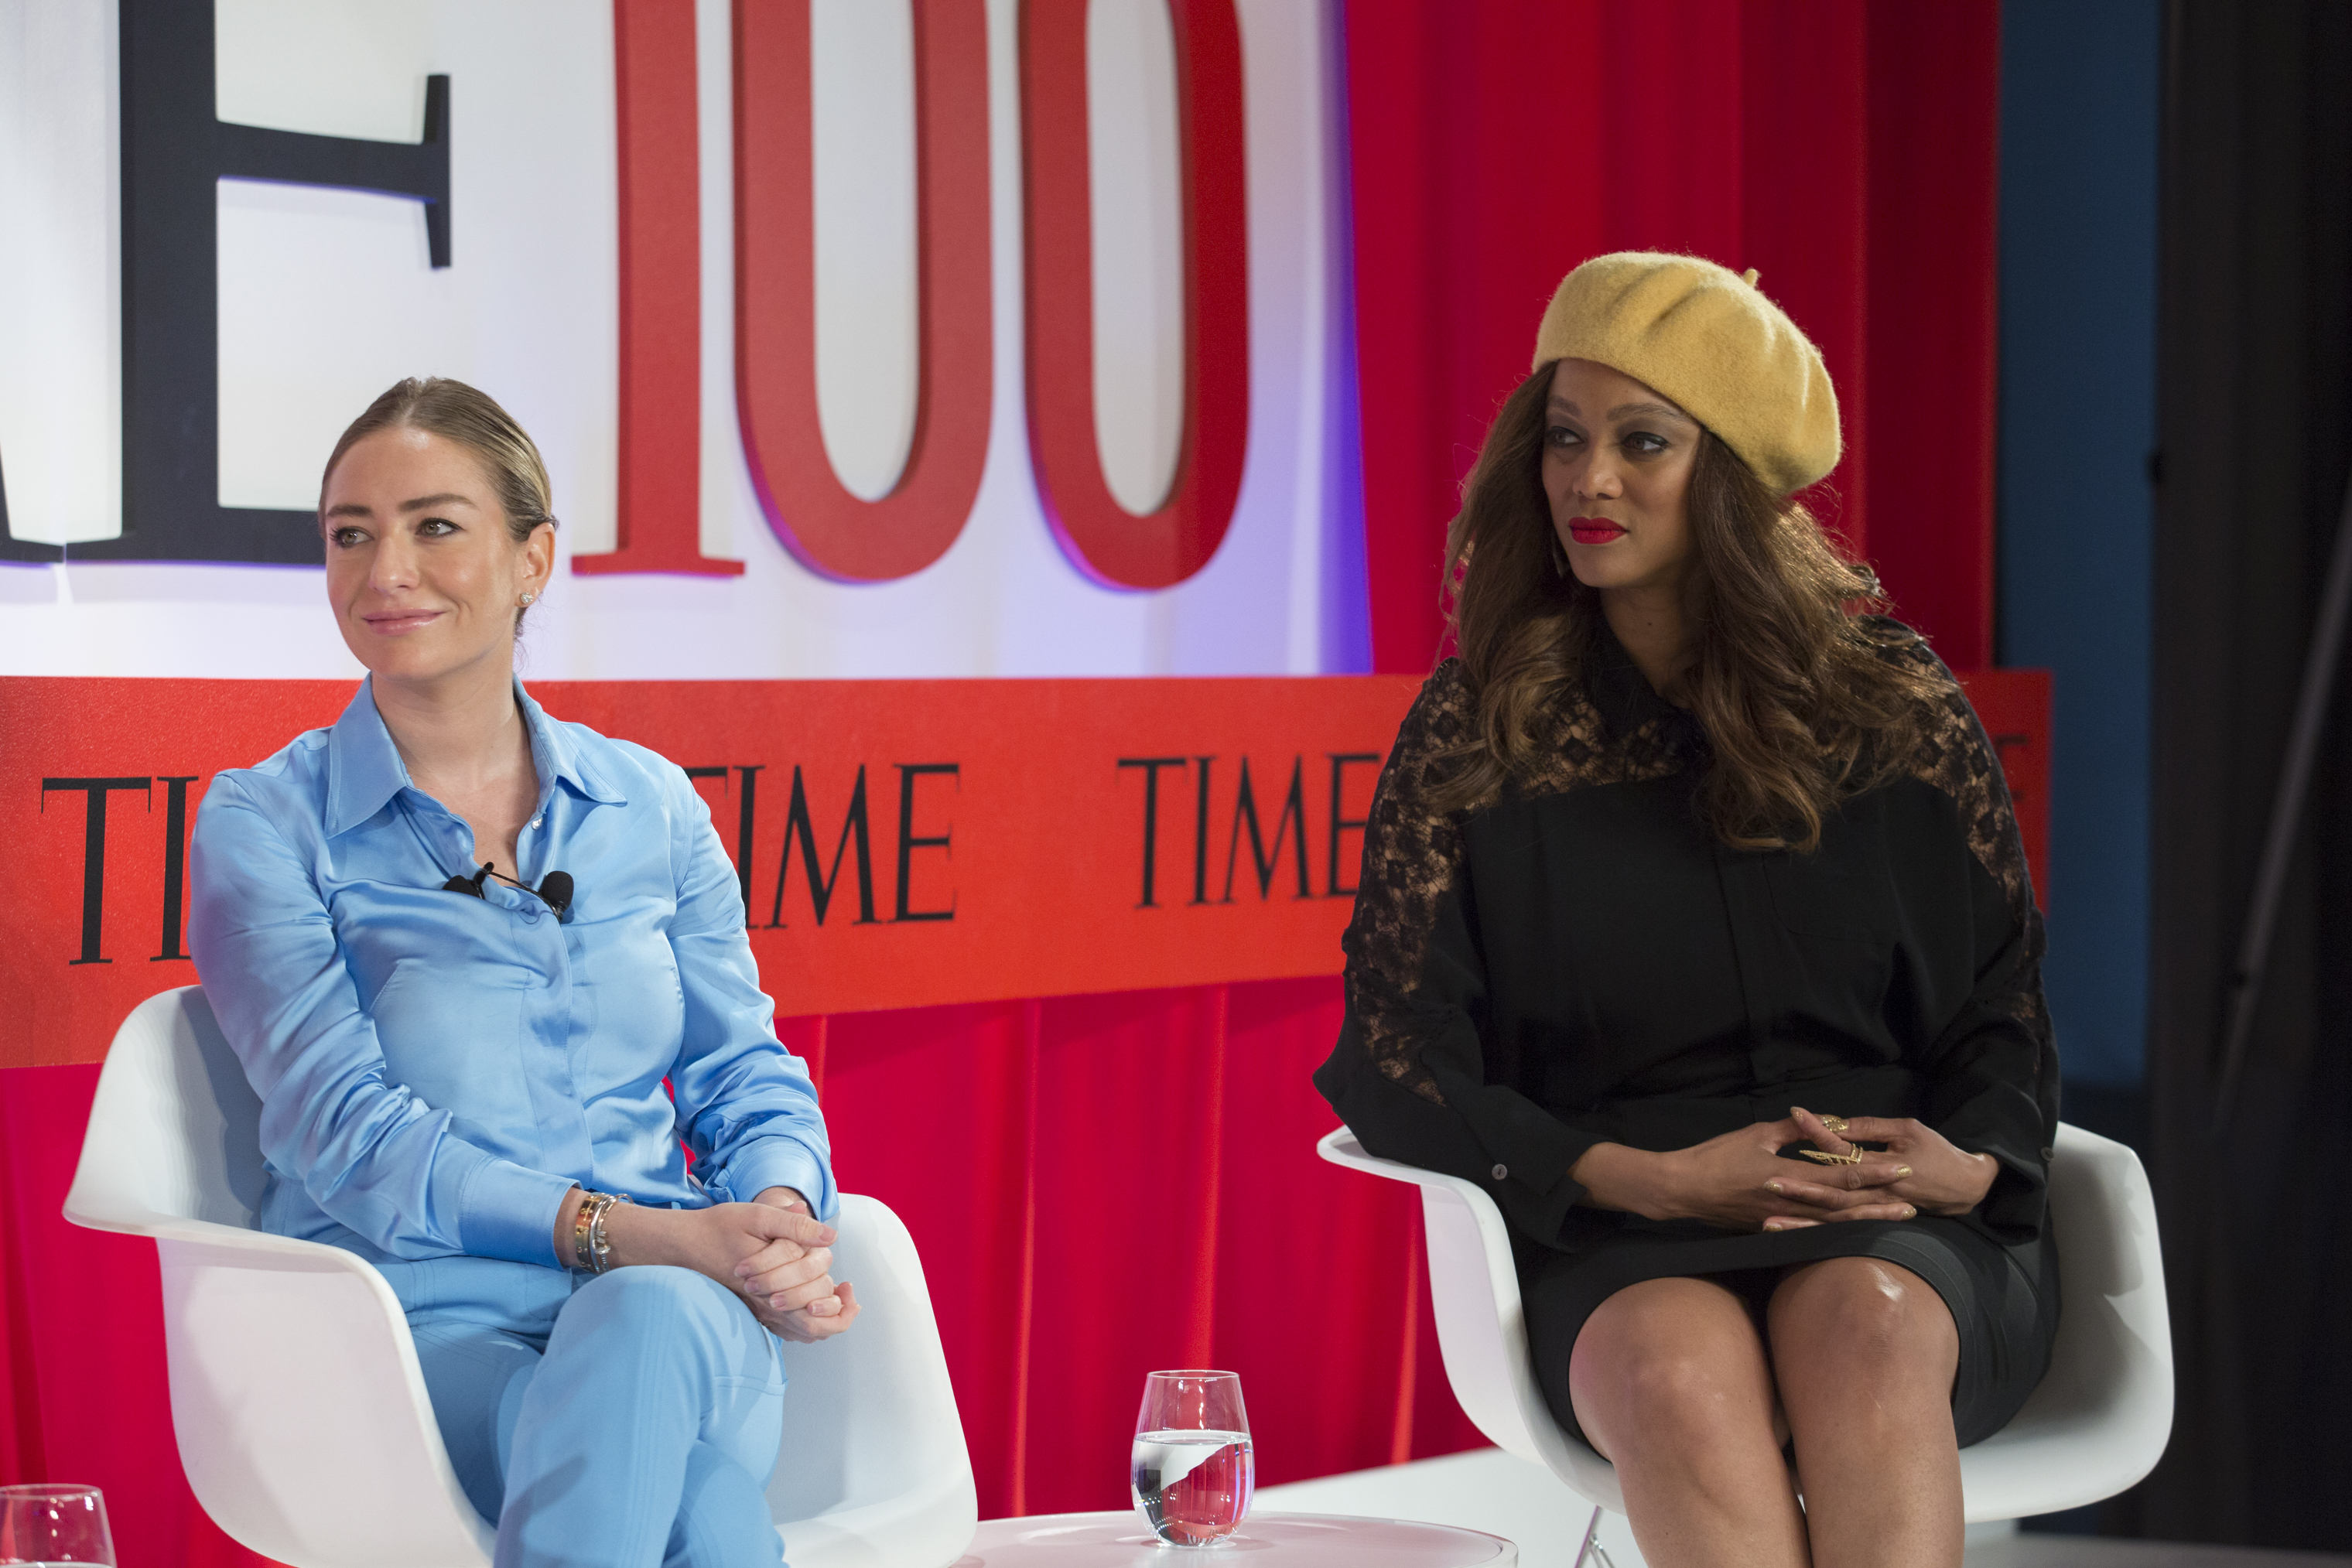 (L-R) Whitney Wolfe Herd and Tyra Banks participate in a panel on Empowering Women in Business at the TIME100 Summit in New York, on April 23, 2019.